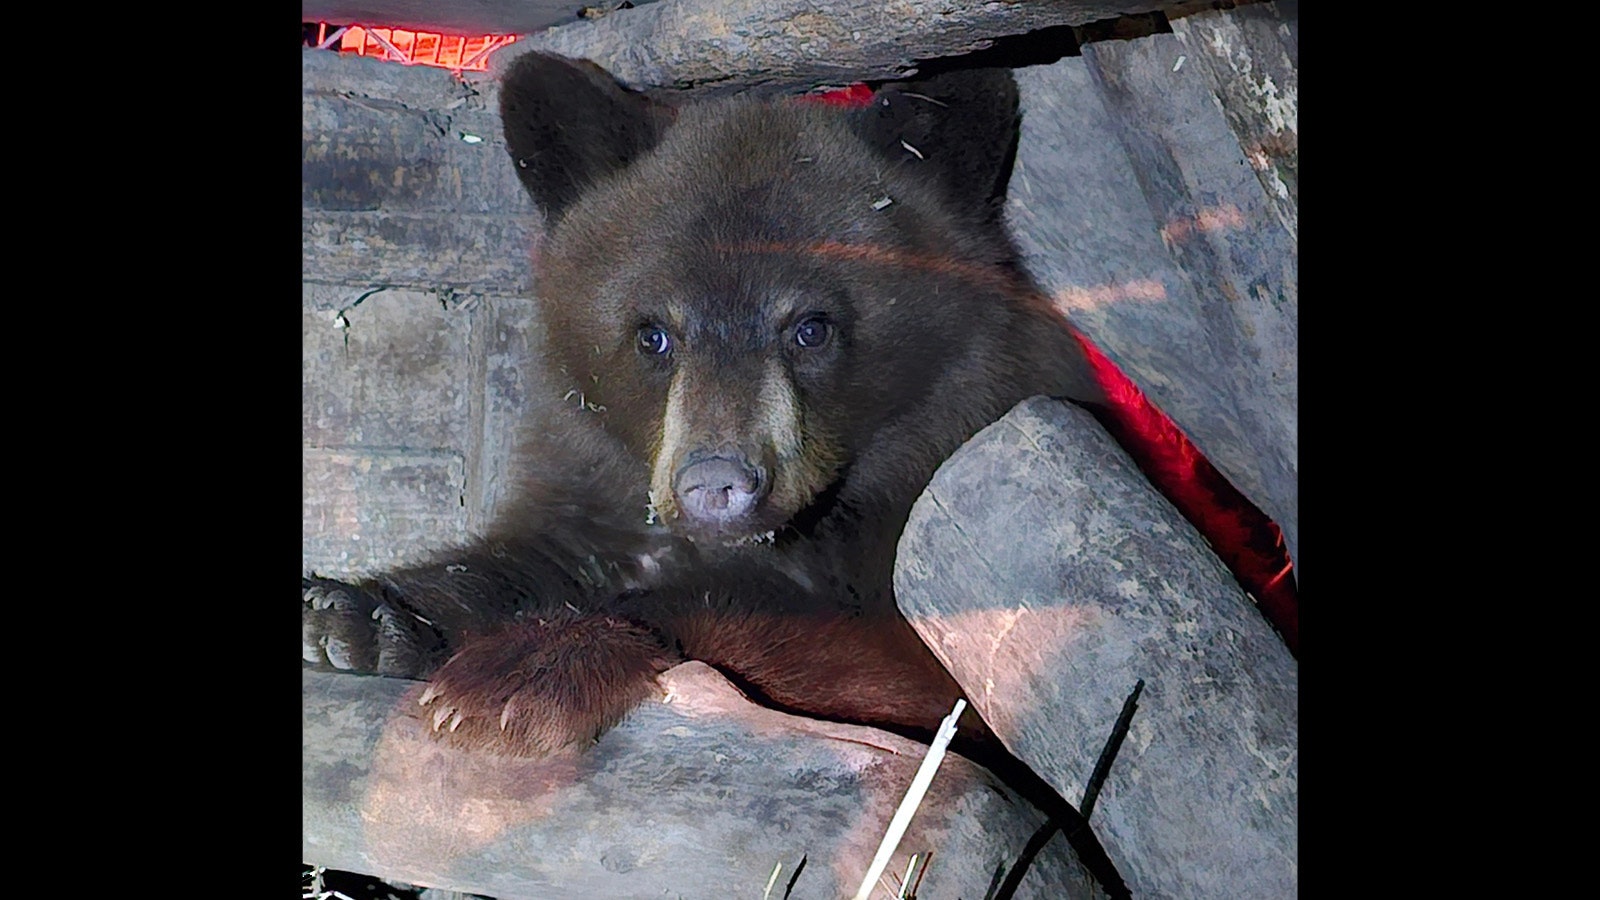 An orphaned Wyoming black bear named Alice has a good chance of survival after found apparently abandoned by her mom.